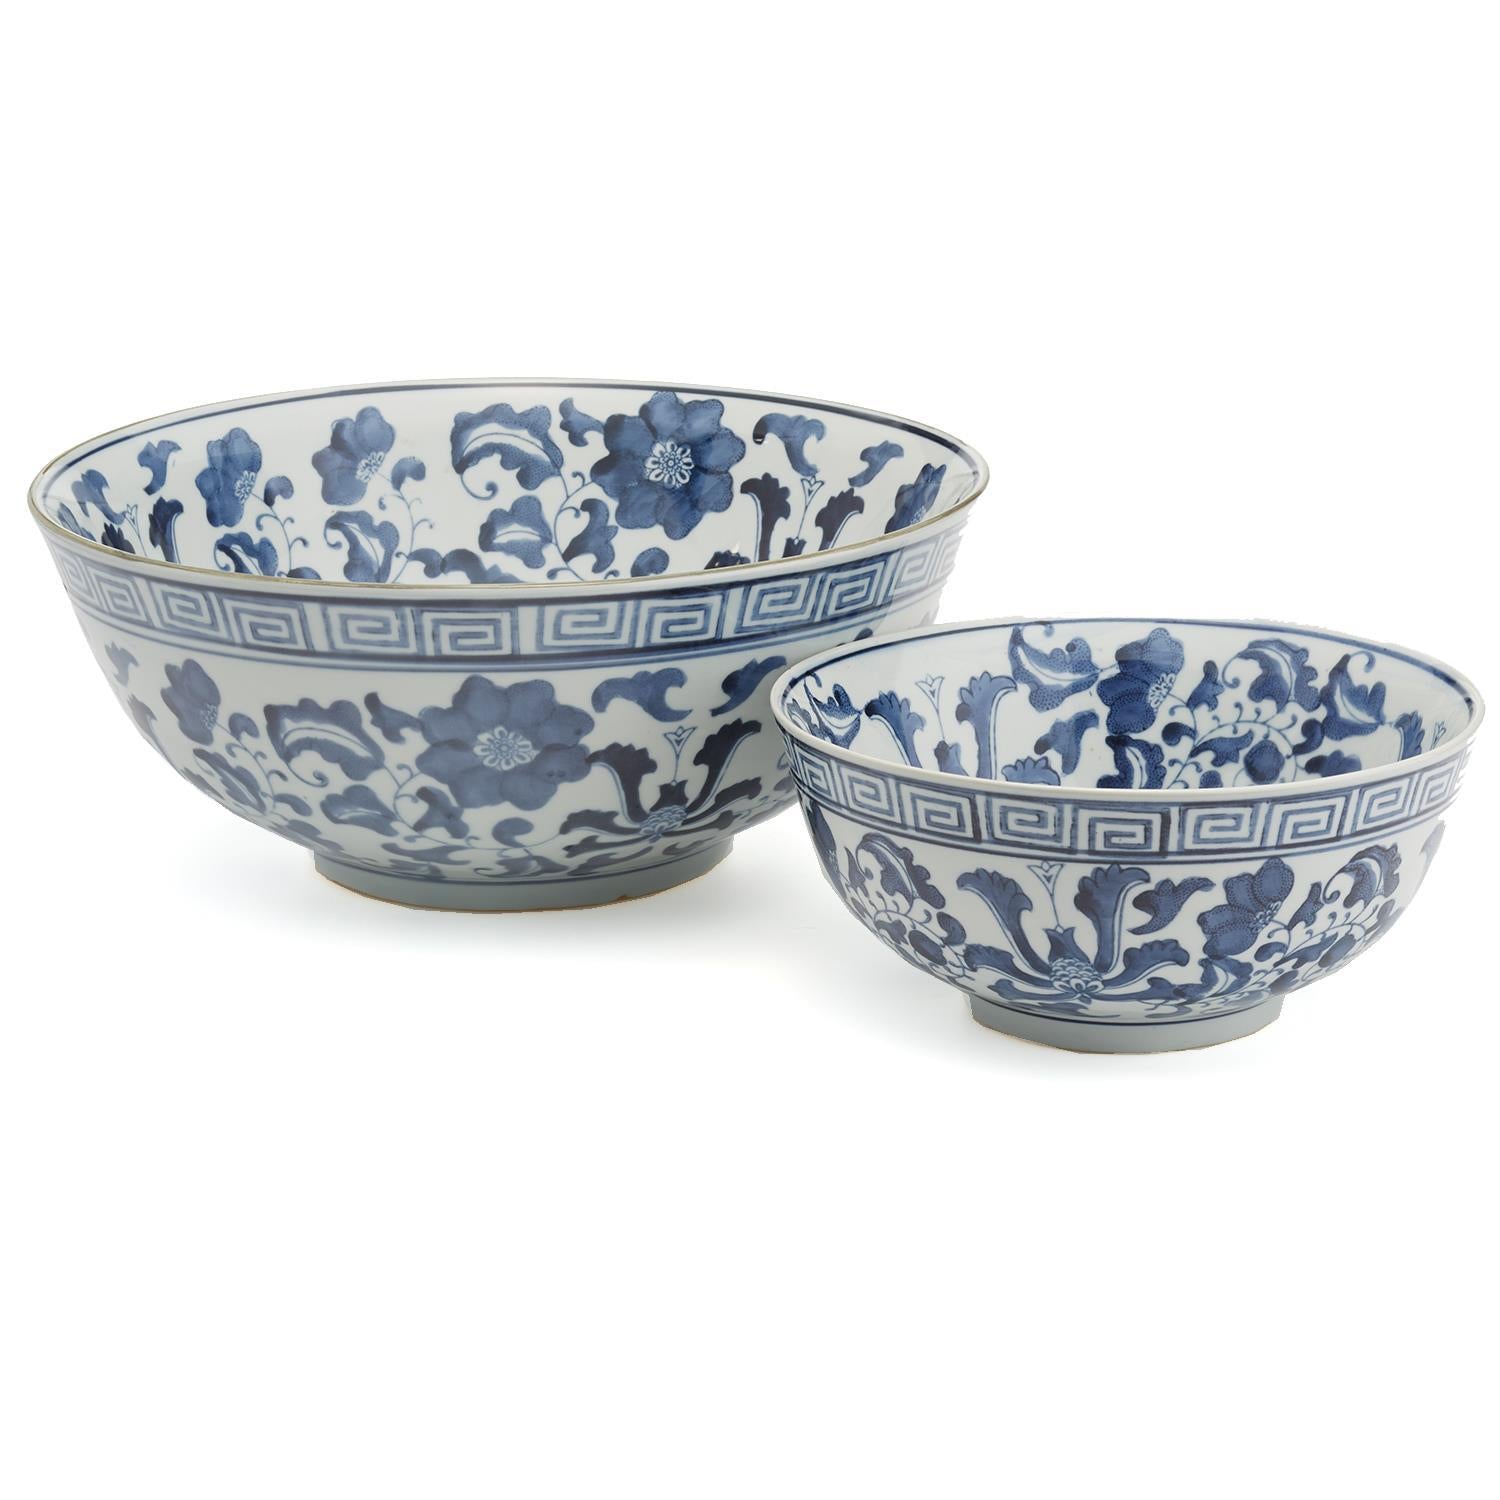 Two's Company Blue and White Lotus Flower Lianzu Decorative Bowls - Hand-Painted Porcelain (set of 2)